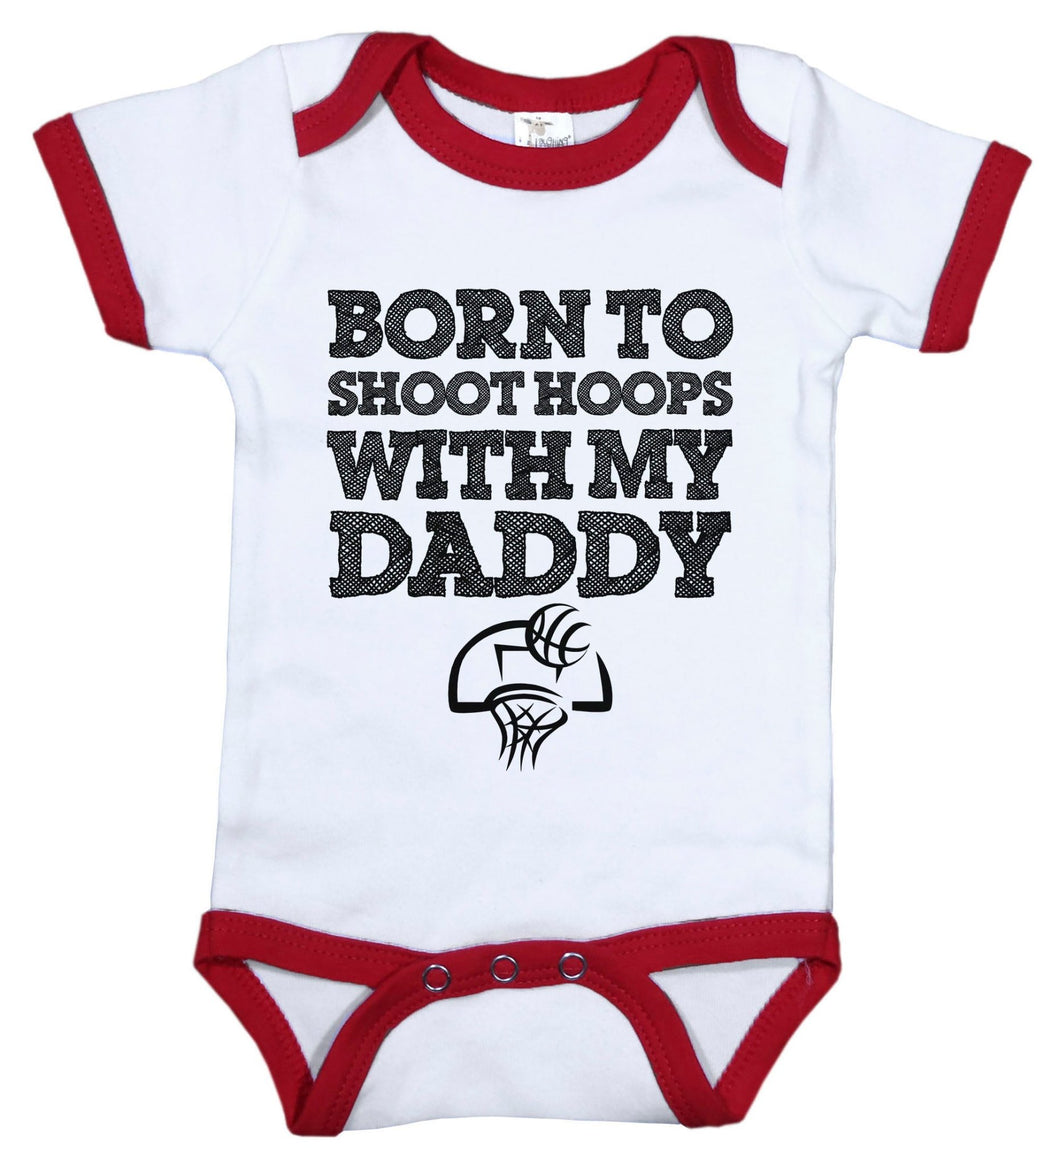 Born To Shoot Hoops With My Daddy / Basketball Ringer Onesie - Baffle